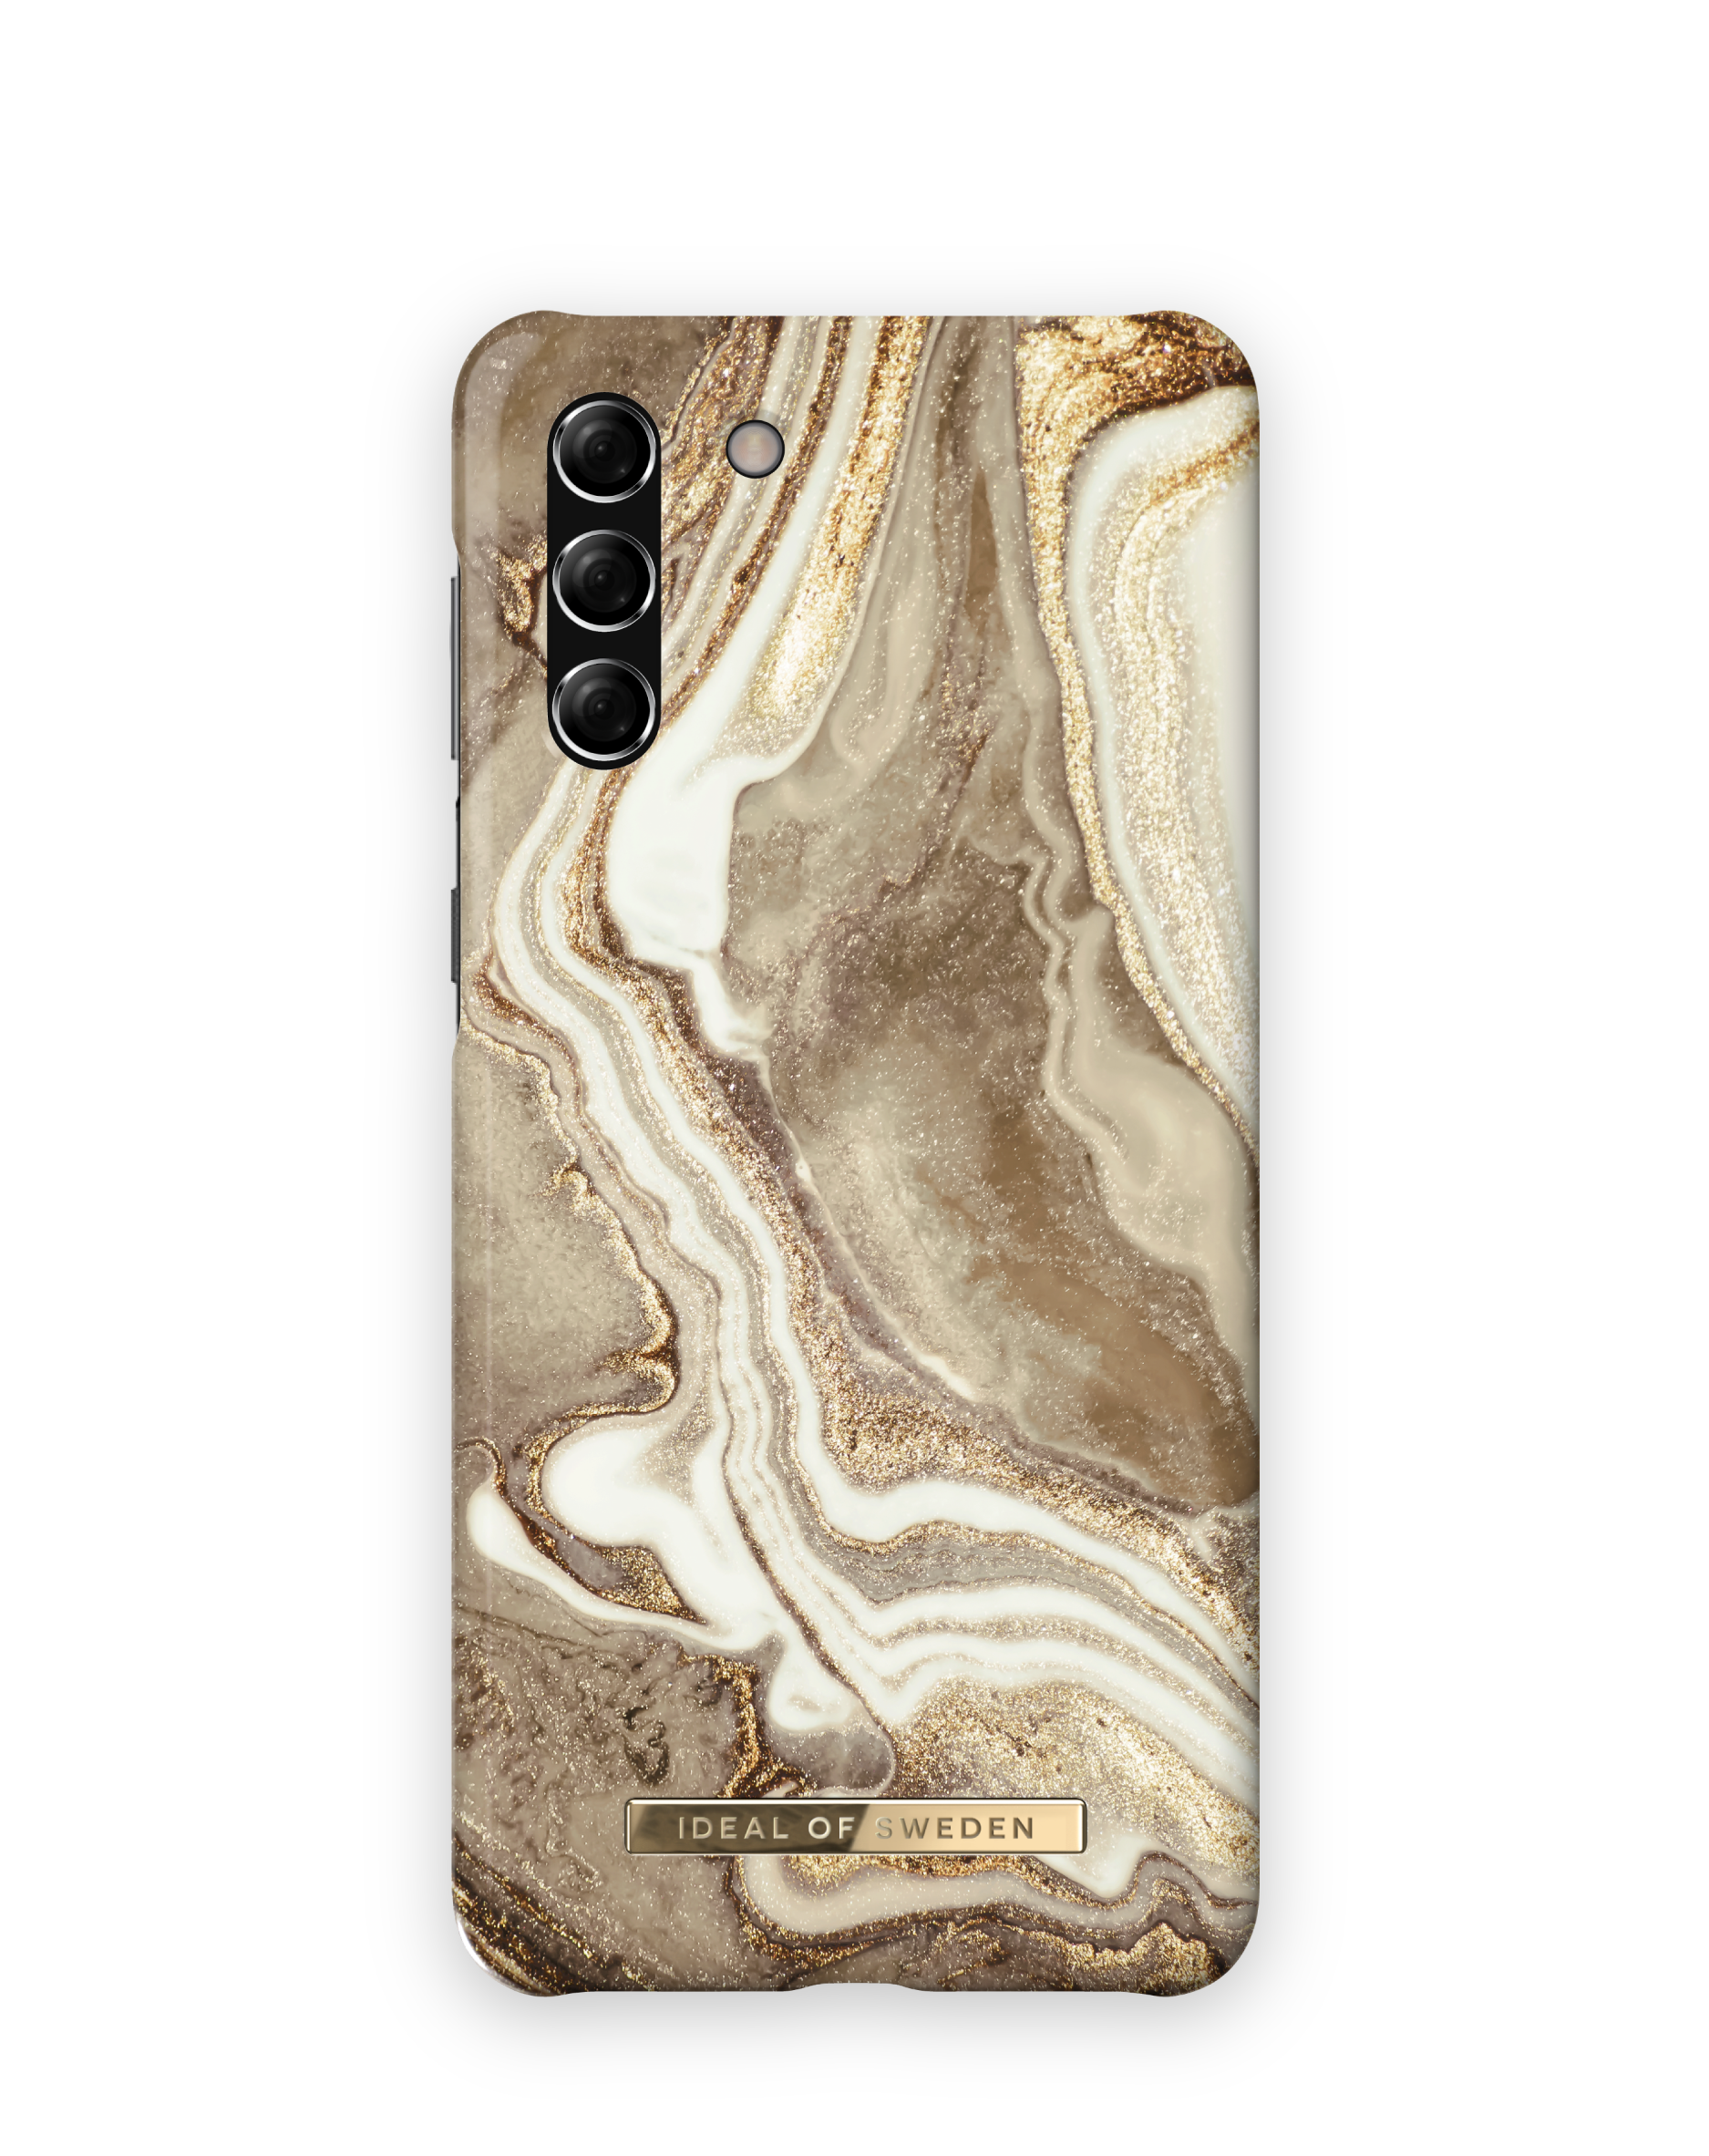 Golden OF Samsung, IDEAL S21+, Sand SWEDEN Galaxy Backcover, IDFCGM19-S21P-164, Marble